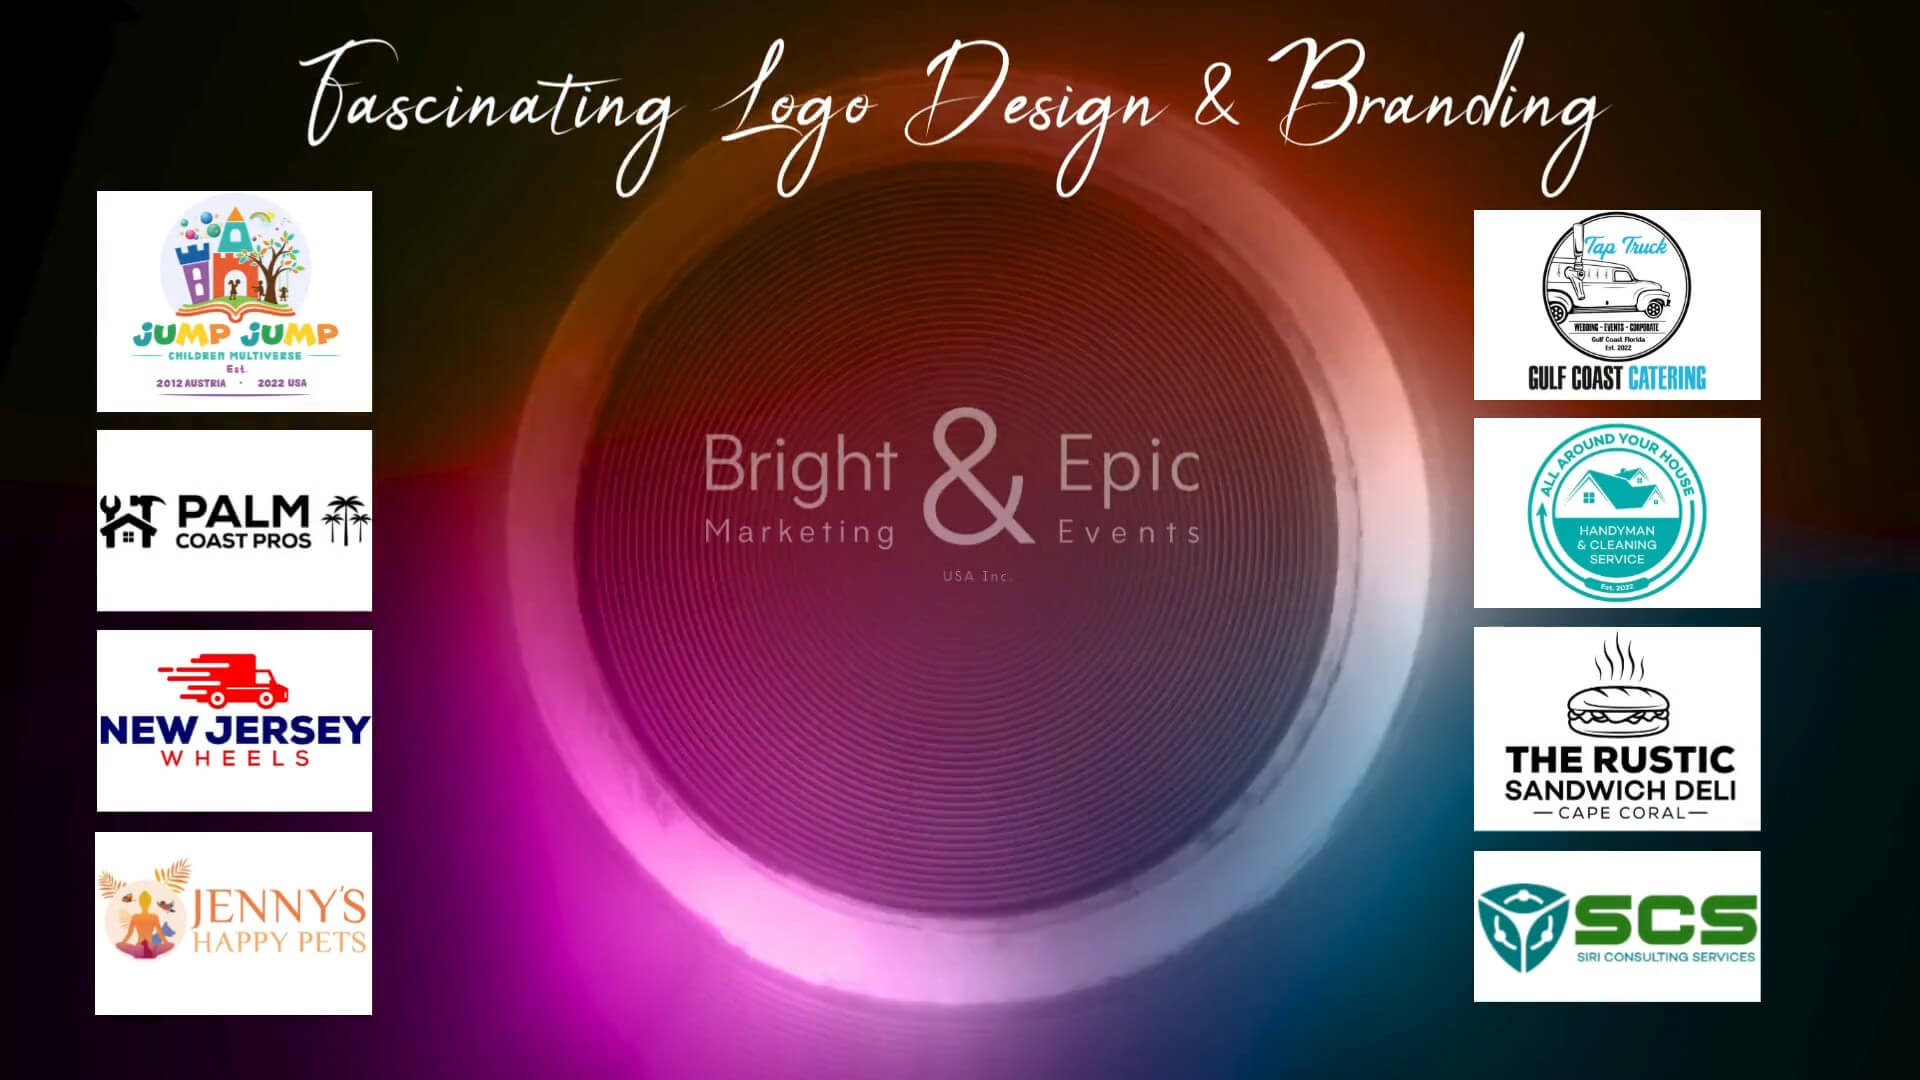 Logo Design, Creative Branding Agency based in Florida for Businesses, Bright & Epic USA